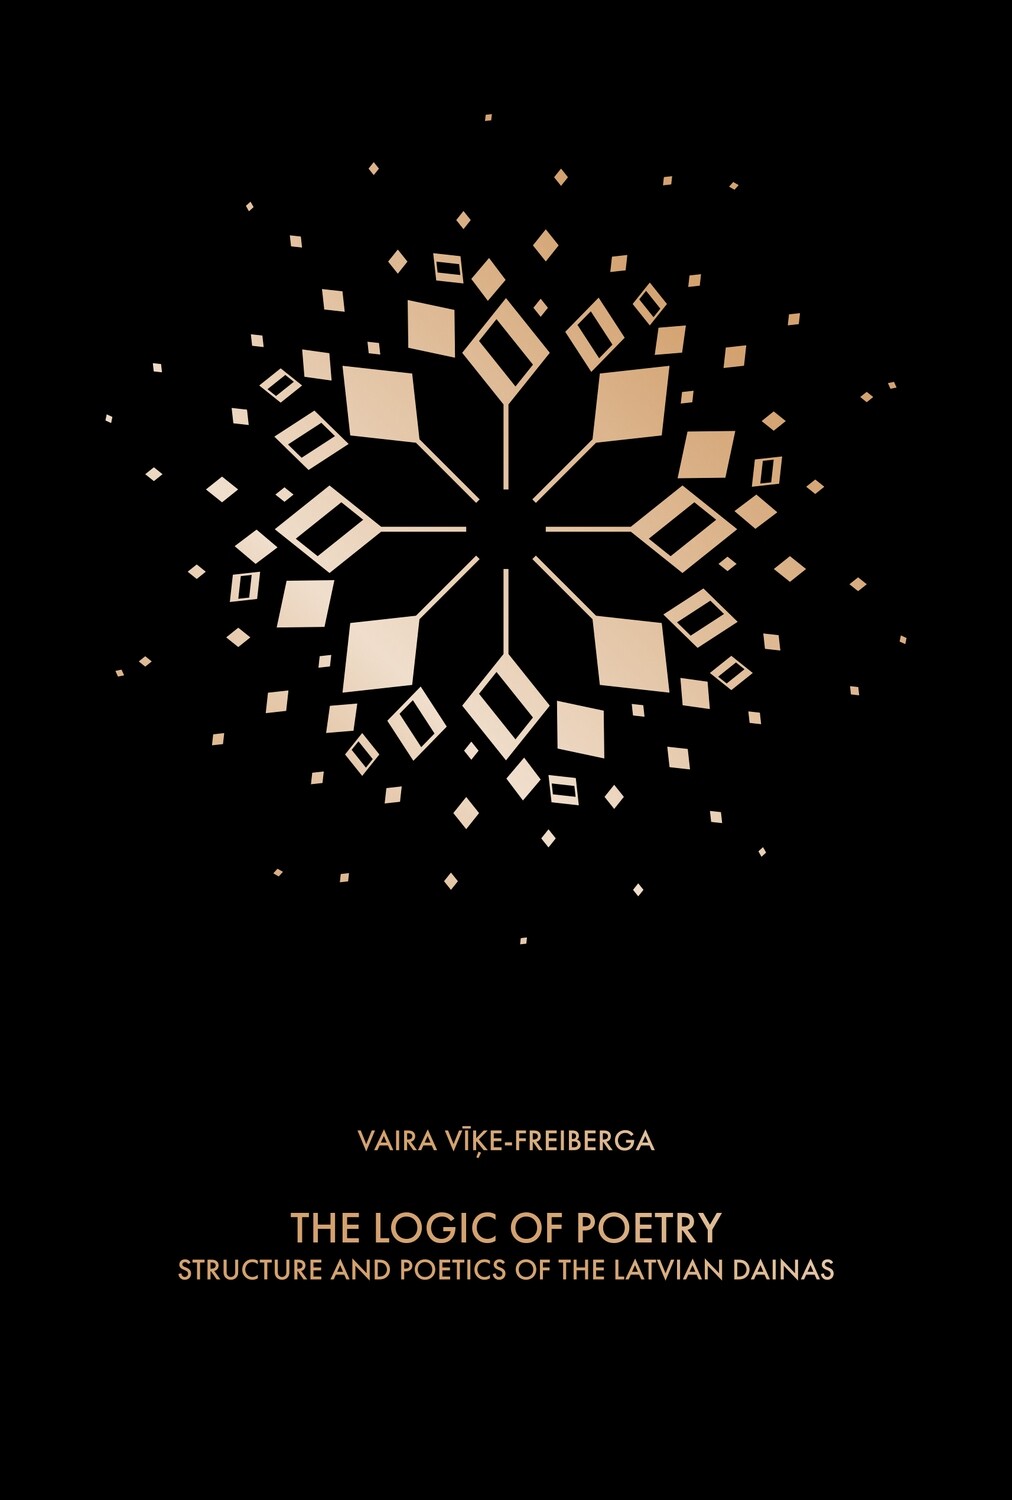 THE LOGIC OF POETRY
STRUCTURE AND POETICS OF THE LATVIAN DAINAS